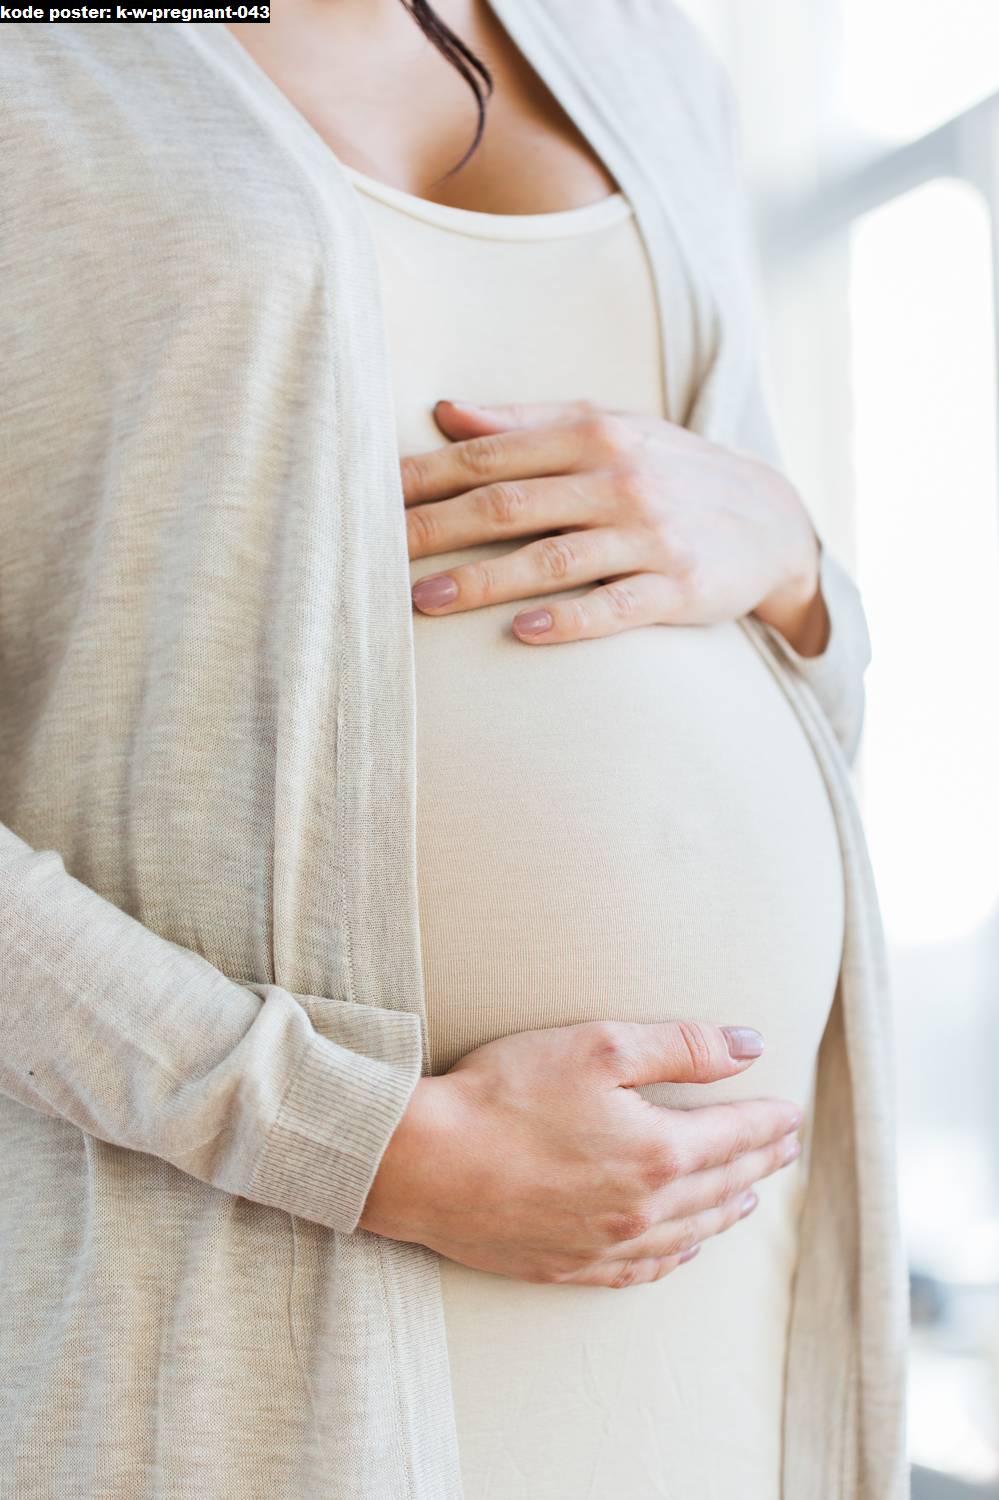 Supplements During Pregnancy: Whatâ€™s Safe and Whatâ€™s Not